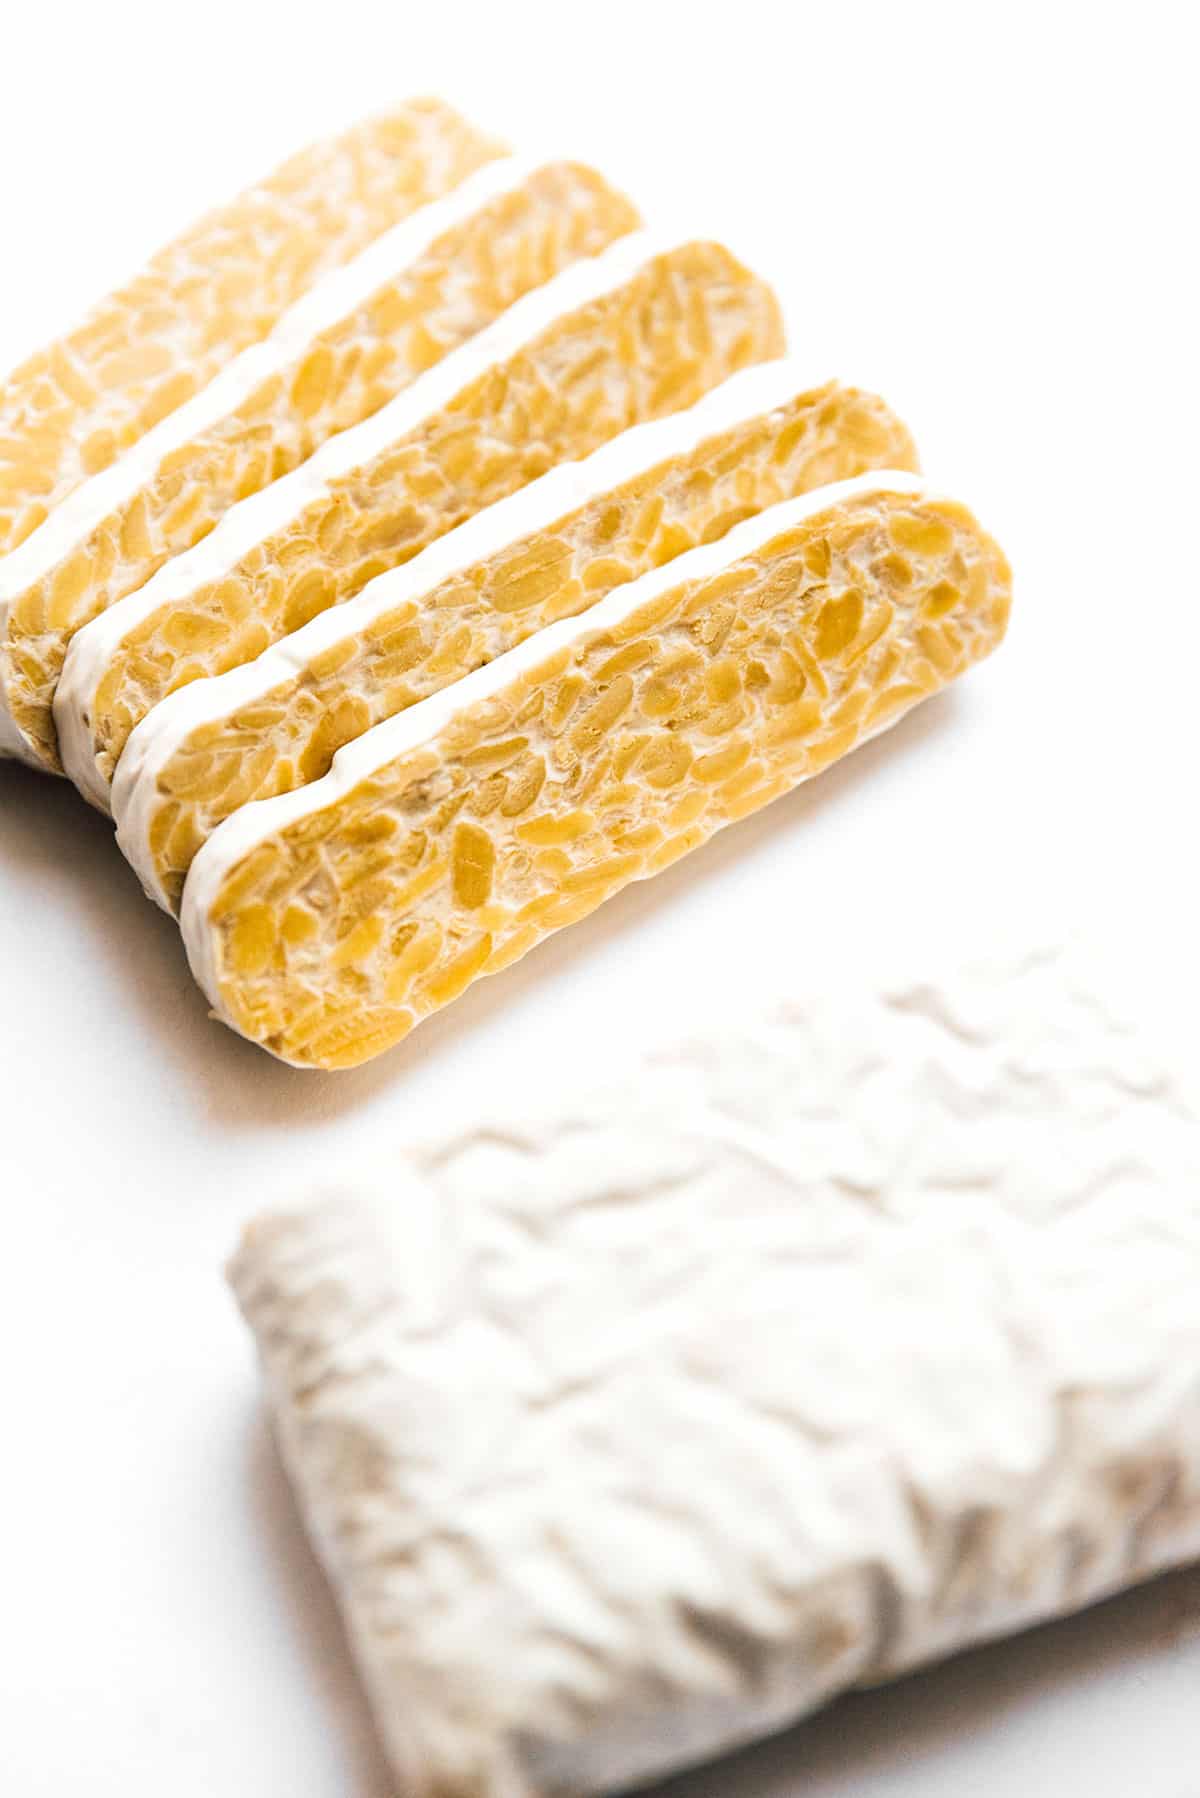 Picture of tempeh block on white background - Let's talk about what you need to know when cooking with tempeh (including what it is, the difference between tofu and tempeh, and how to cook it)!